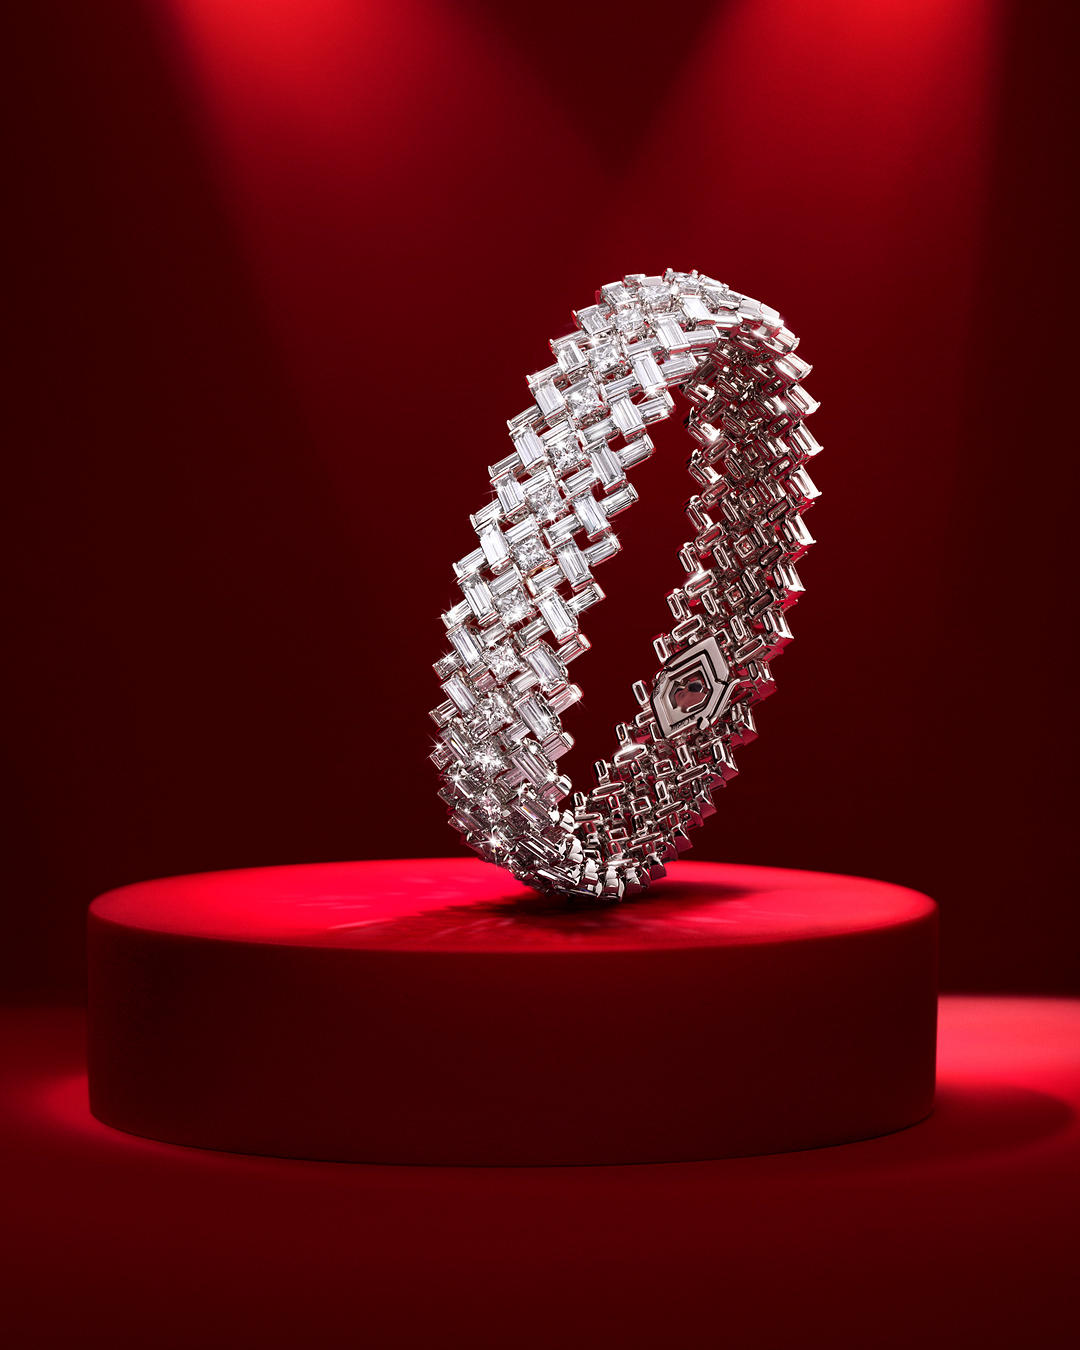 image  1 Cartier Official - Cartier's diamond gifts create achitectures of light with a dazzling charm